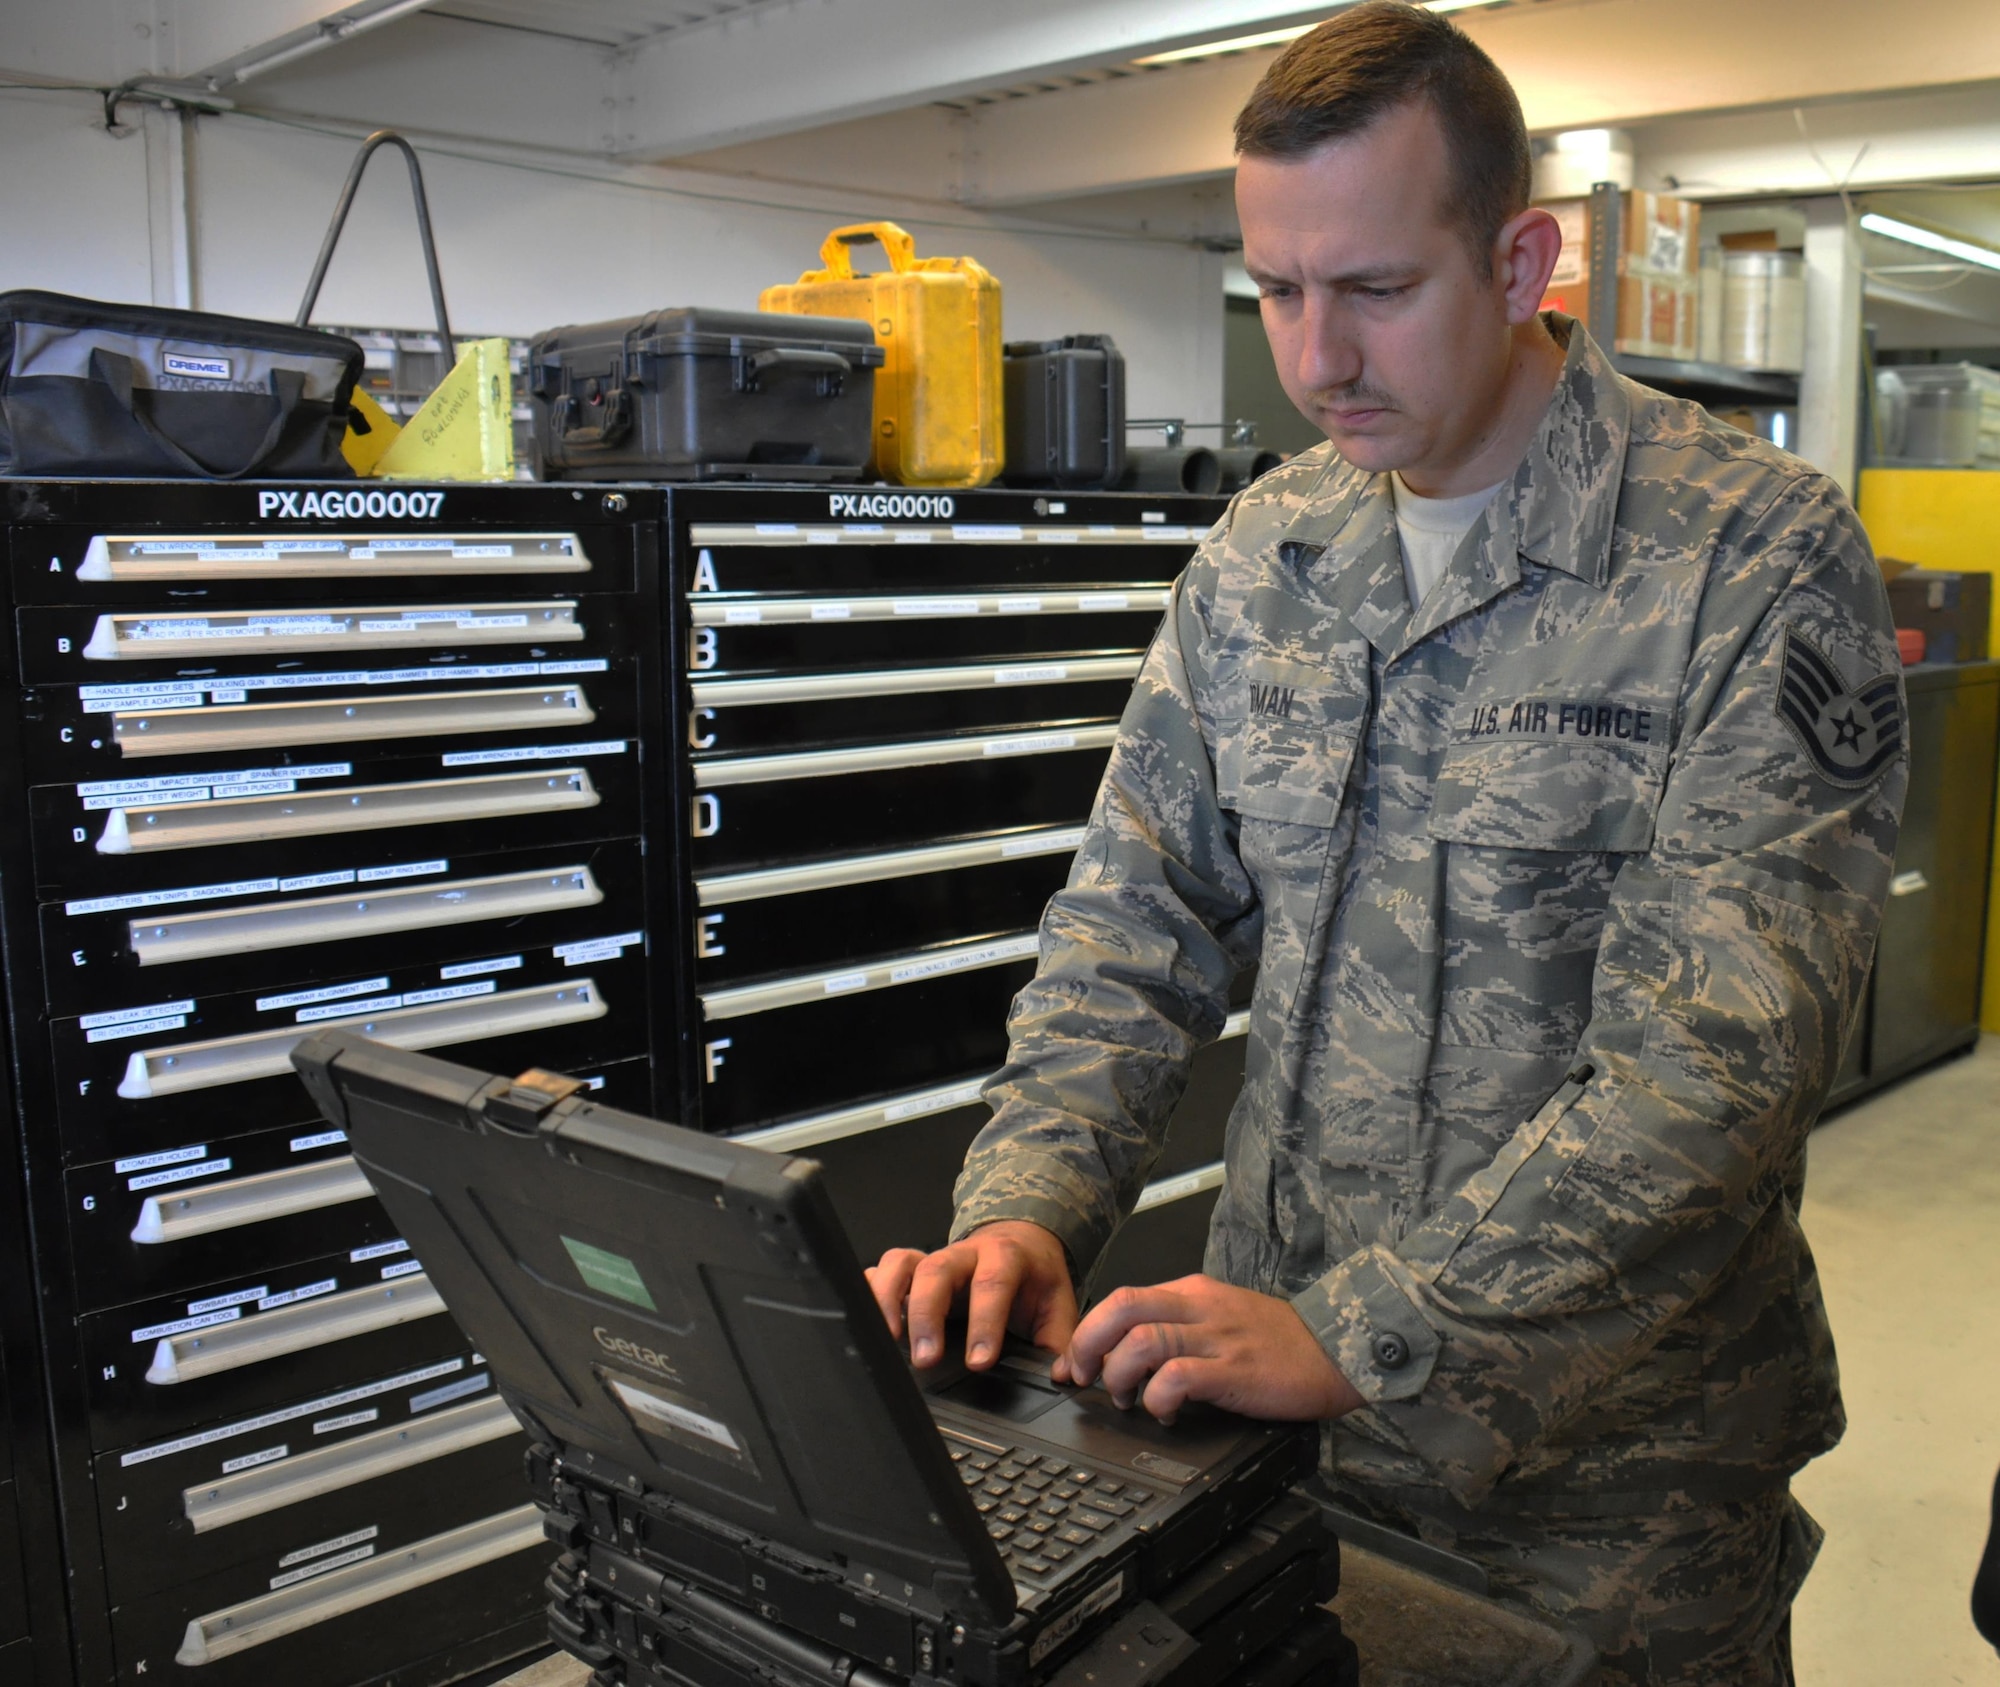 Staff Sgt. Kenneth Roman, 379th Expeditionary Maintenance Squadron Aerospace Ground Equipment Flight journeyman from Charlotte, North Carolina, conducts a check of one of the flight’s computers inside the AGE facility at Al Udeid Air Base, Qatar, Feb. 4. The flight uses computers to reference operating instructions. Roman is responsible for nearly 700 tools and parts including hammers, sockets, drills and computers. The AGE Flight maintains tools and equipment valued at $32 million. (U.S. Air Force photo by Tech. Sgt. James Hodgman/Released)